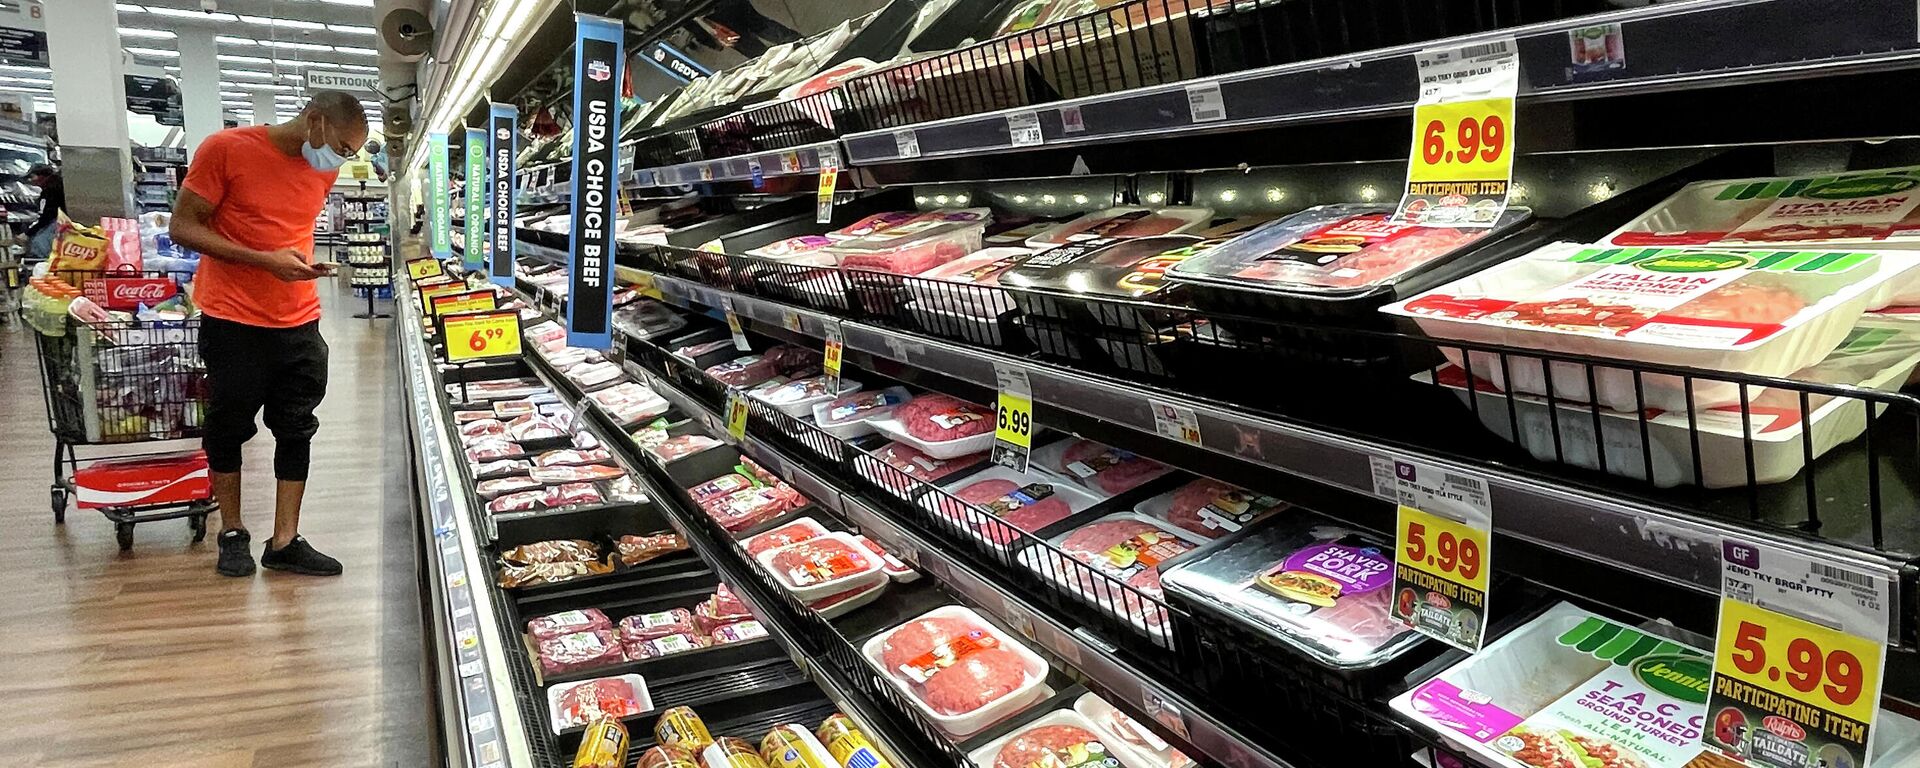 A person shops in the meat section of a grocery store on November 11, 2021 in Los Angeles, California. U.S. consumer prices have increased solidly in the past few months on items such as food, rent, cars and other goods as inflation has risen to a level not seen in 30 years. The consumer-price index rose by 6.2 percent in October compared to one year ago.   - Sputnik International, 1920, 01.12.2021